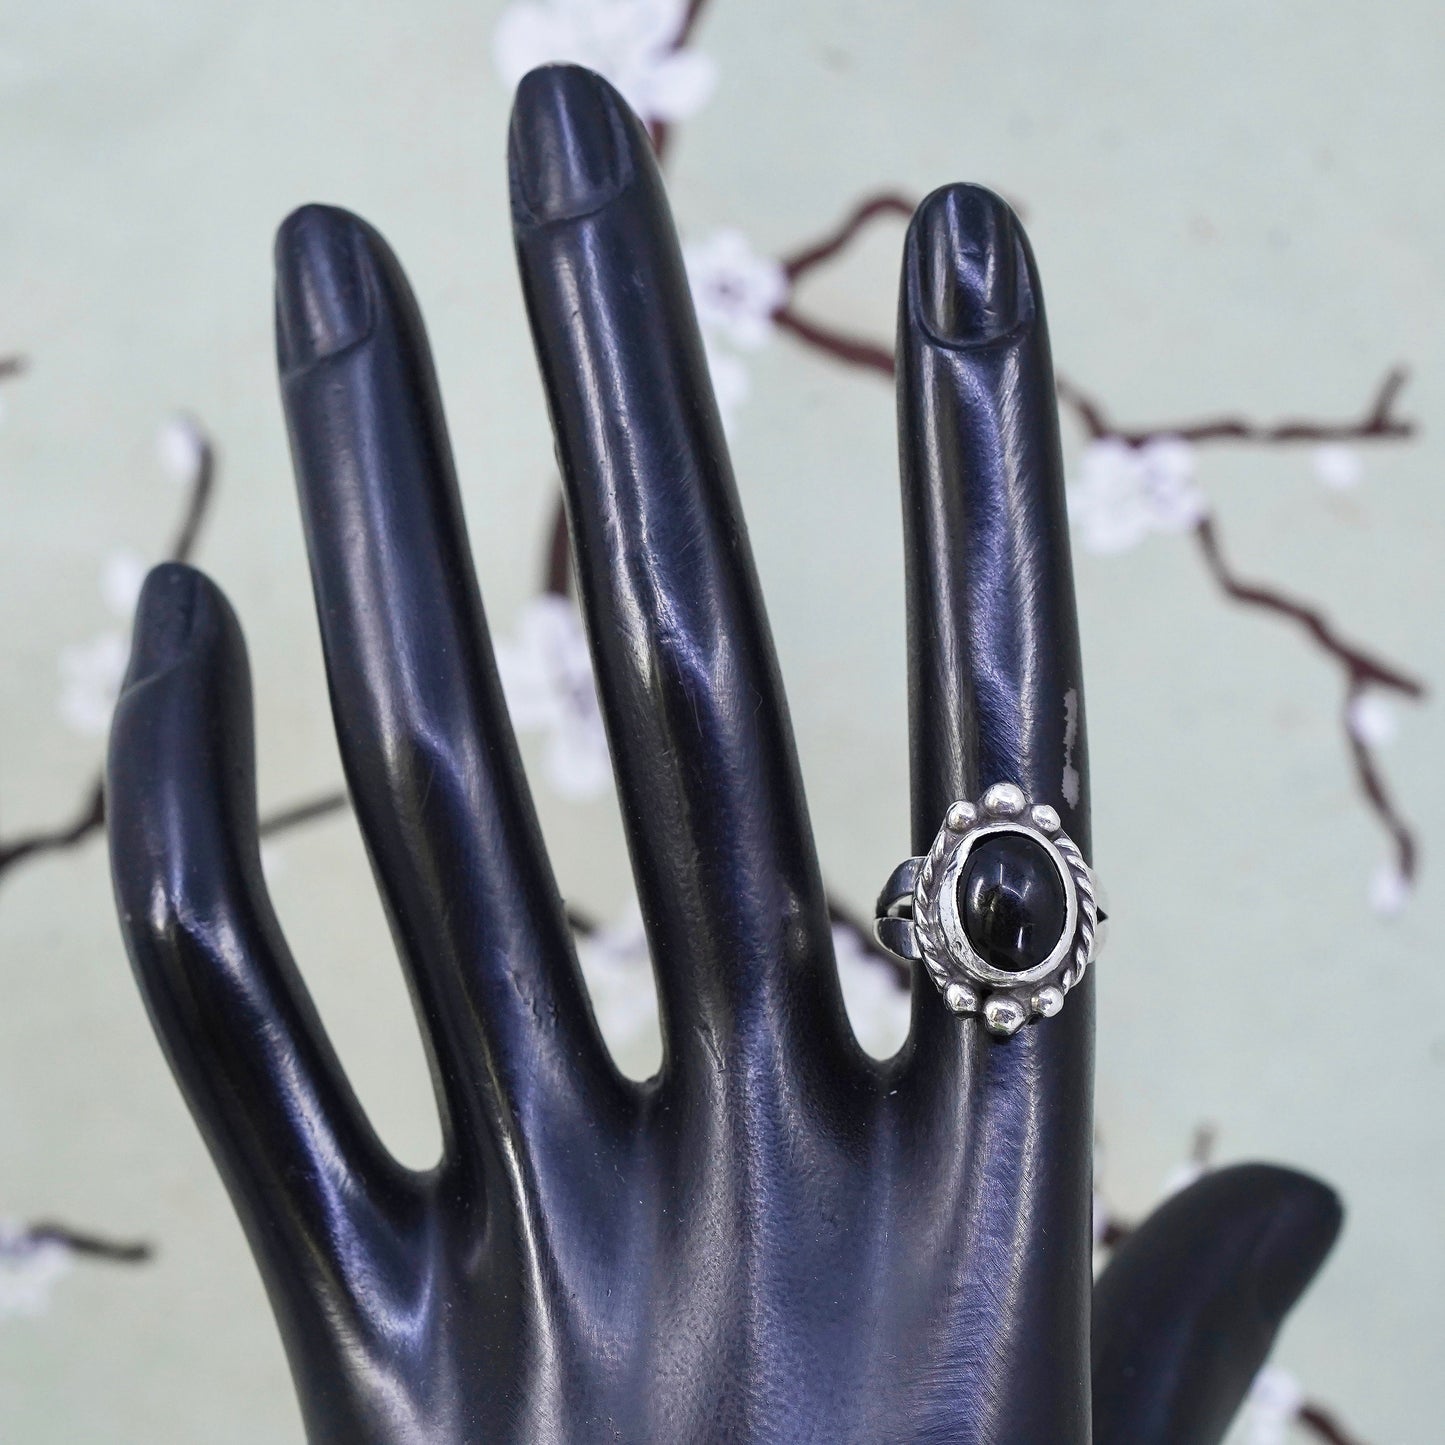 Size 4.5, Vintage sterling 925 silver handmade ring with onyx and bead details